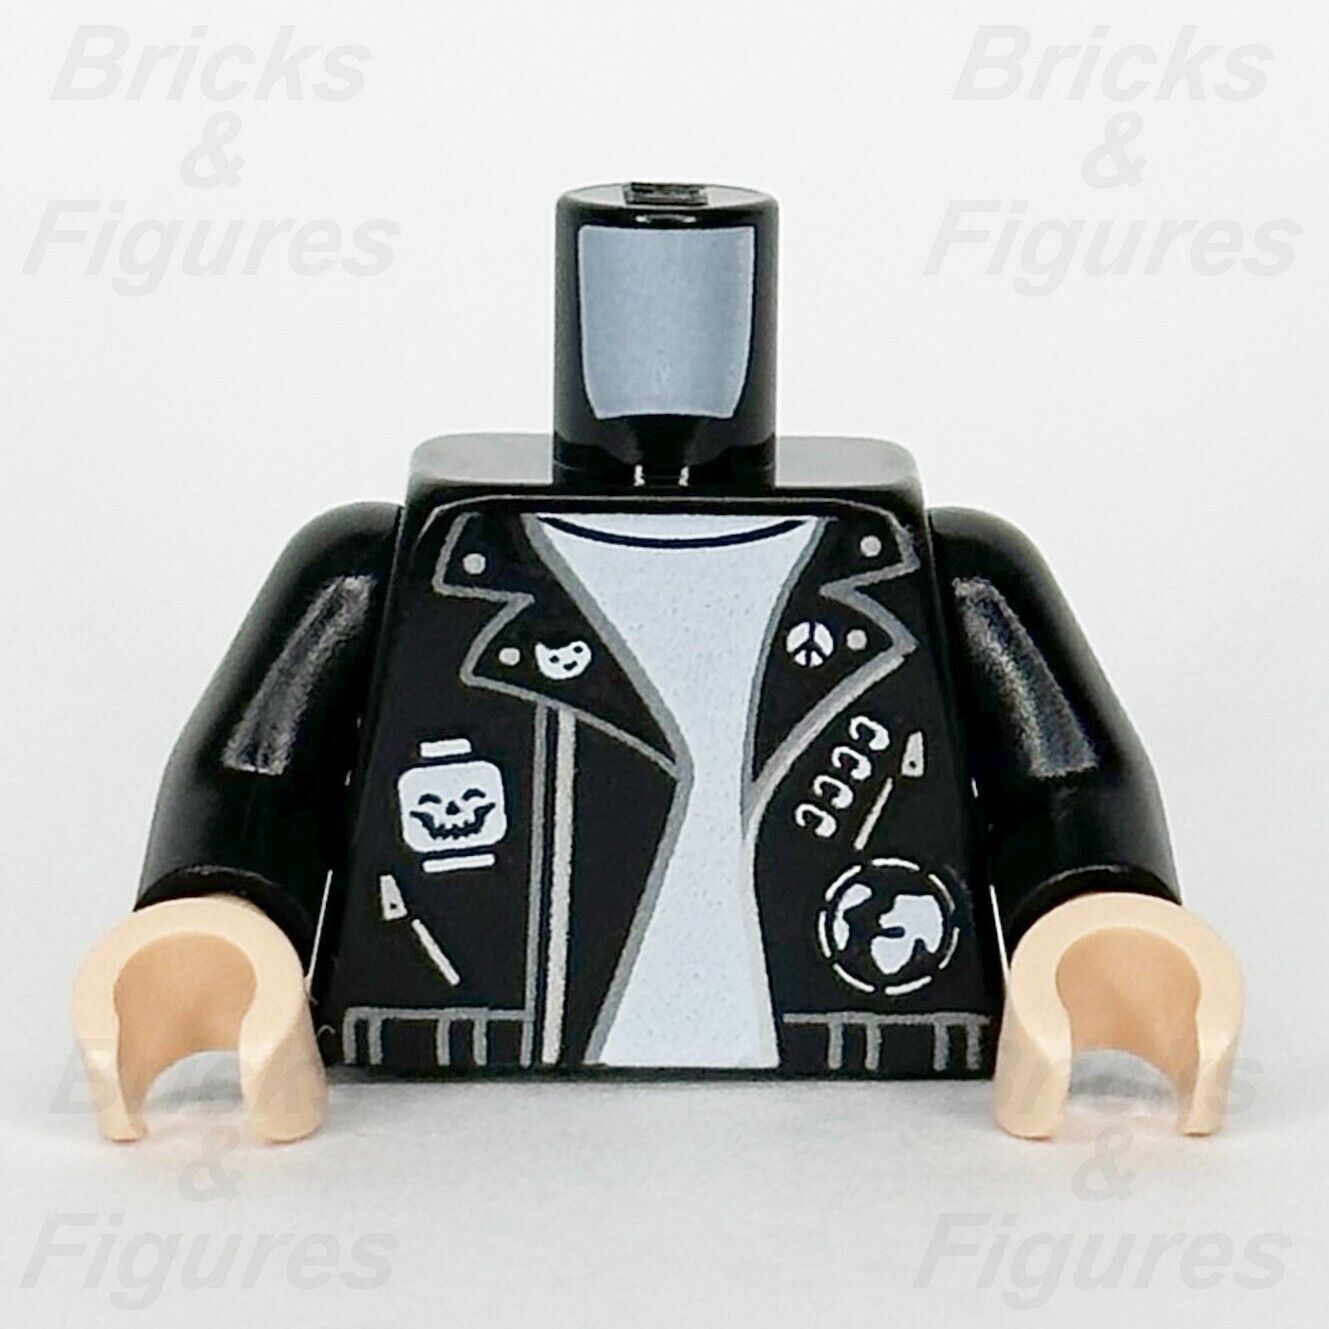 LEGO Queer Eye Body Torso Minifigure Part 'Rebuild the World' Leather Jacket 1